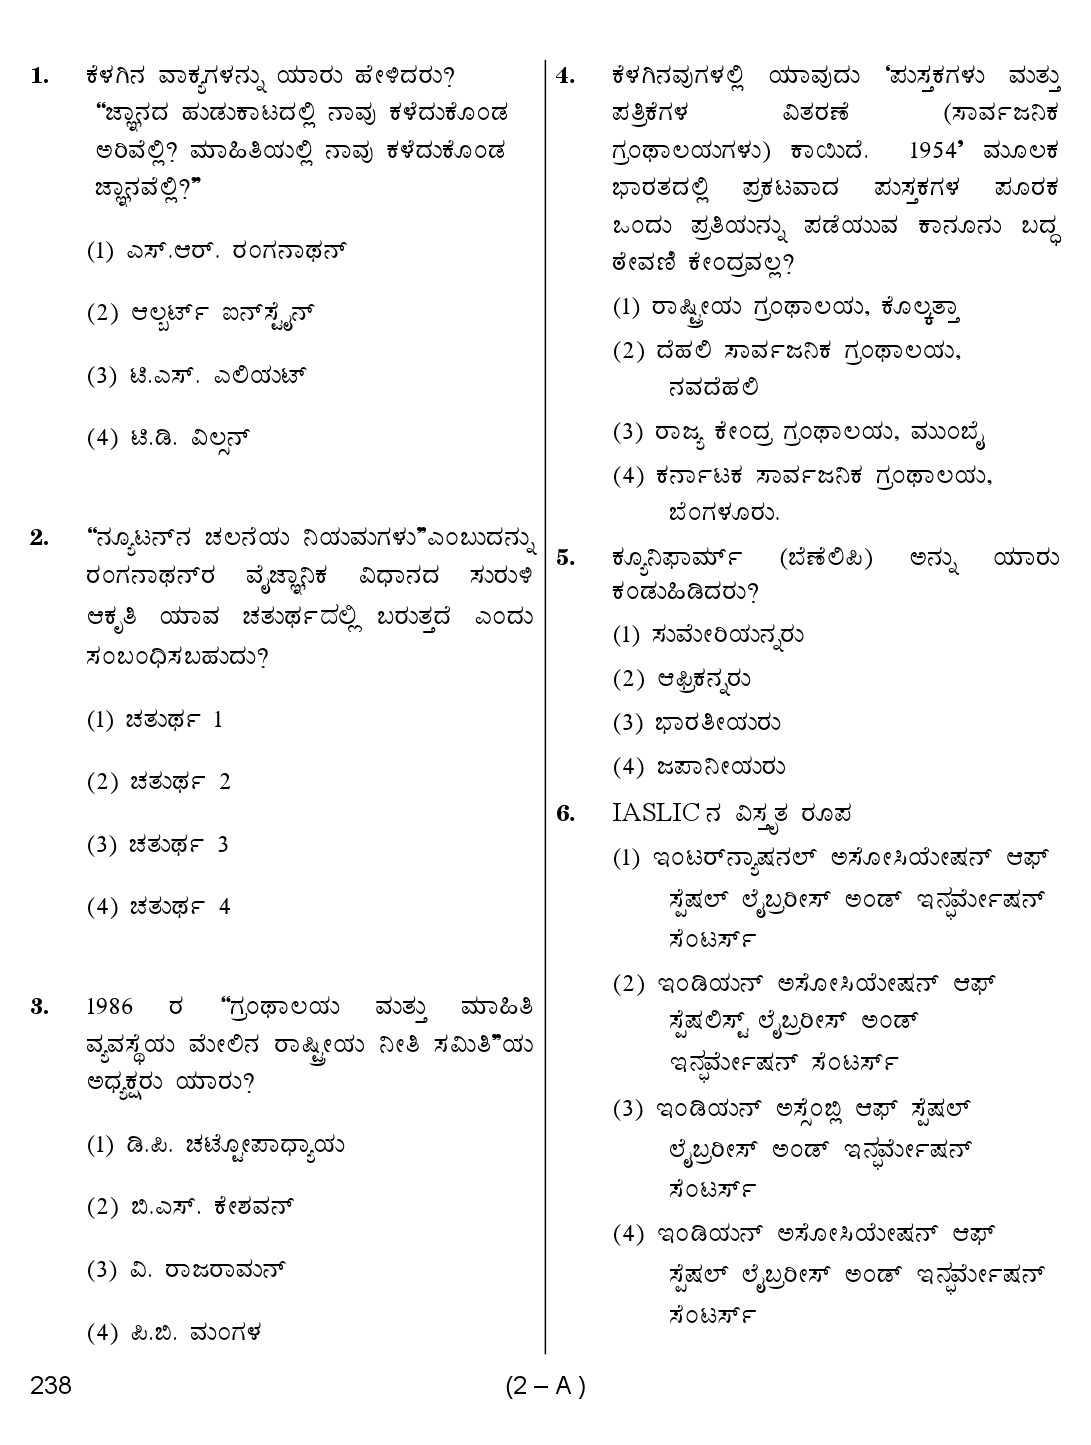 Karnataka PSC 238 Specific Paper II Librarian Exam Sample Question Paper 2